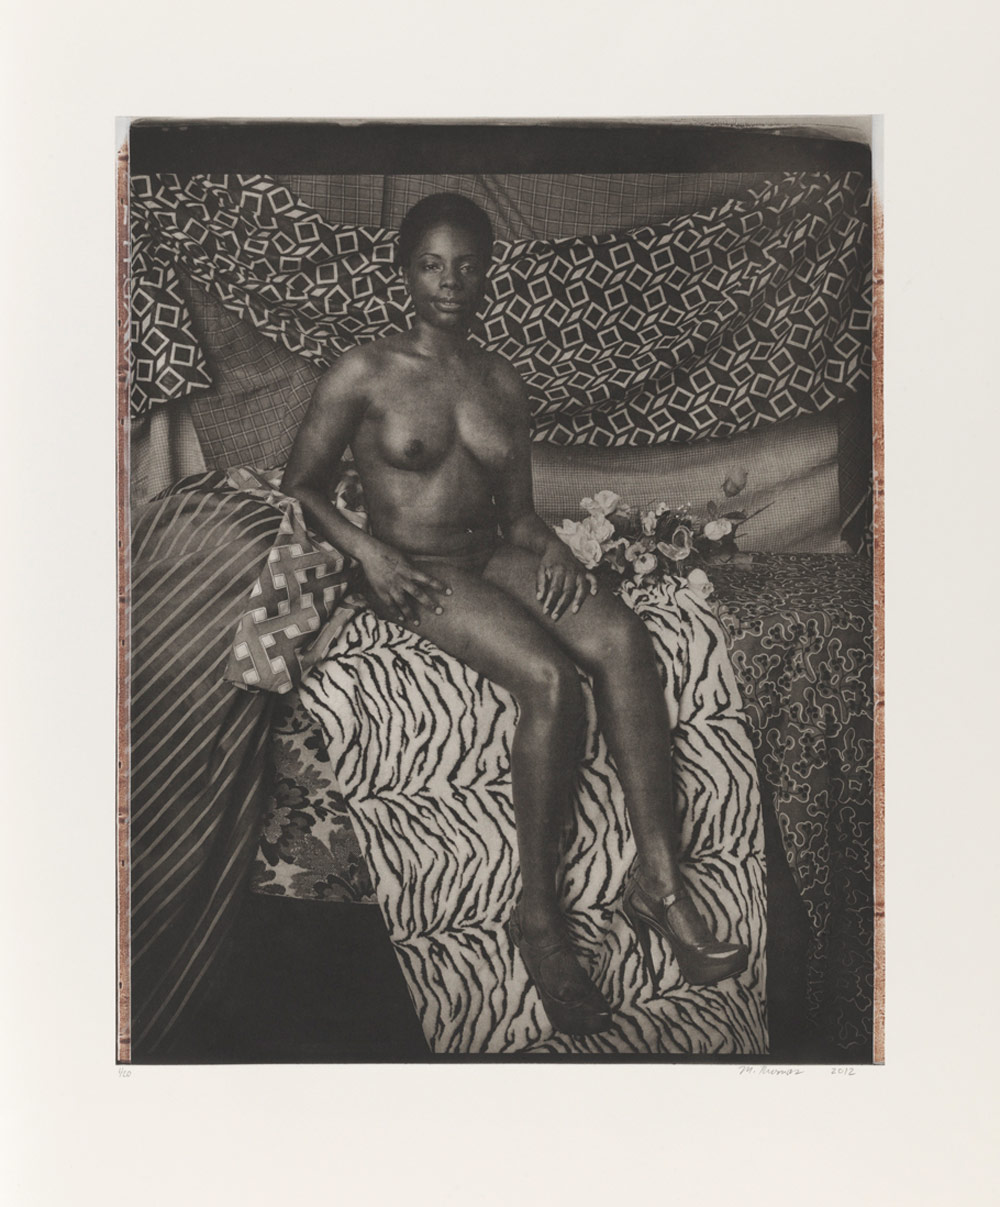 Mickalene Thomas: "Portrait of Marie Sitting in Black and White"